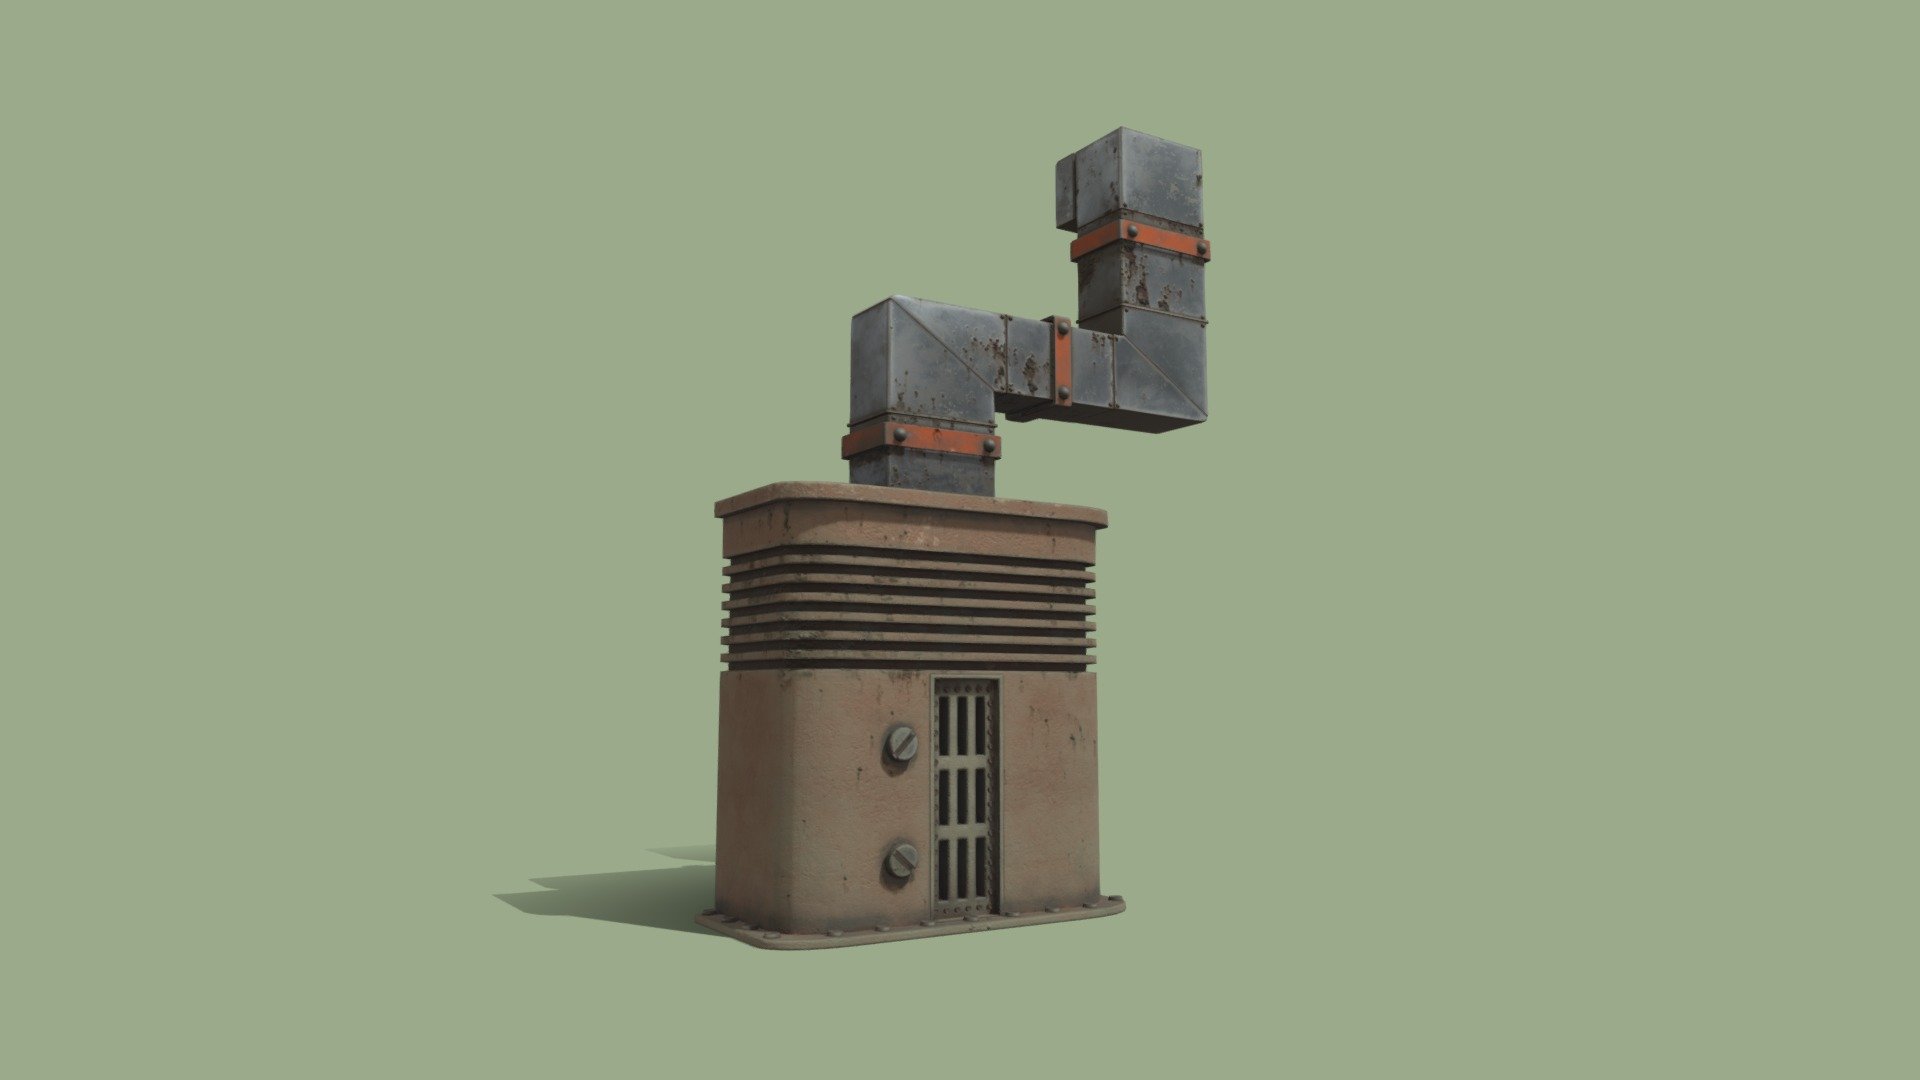 This is an MMLX environment asset designed to work within the dungeon ruins of the Mega Man Legends universe. As seen in the concept art, this is a wall unit that has details to suggest it is some kind of boiler or furnace.

The asset provided here is the high res game asset. That includes the textures. Feel free to download and use for your projects. Please credit PSYCHOPOMP and/or JJ Chalupnik for the modeling/texturing if you decide to use it.

Learn more about the fan project here: https://psychopomp-studios.com/mmlx/ - Boiler - Download Free 3D model by TUGBOAT GAMES (@TugboatGames) 3d model